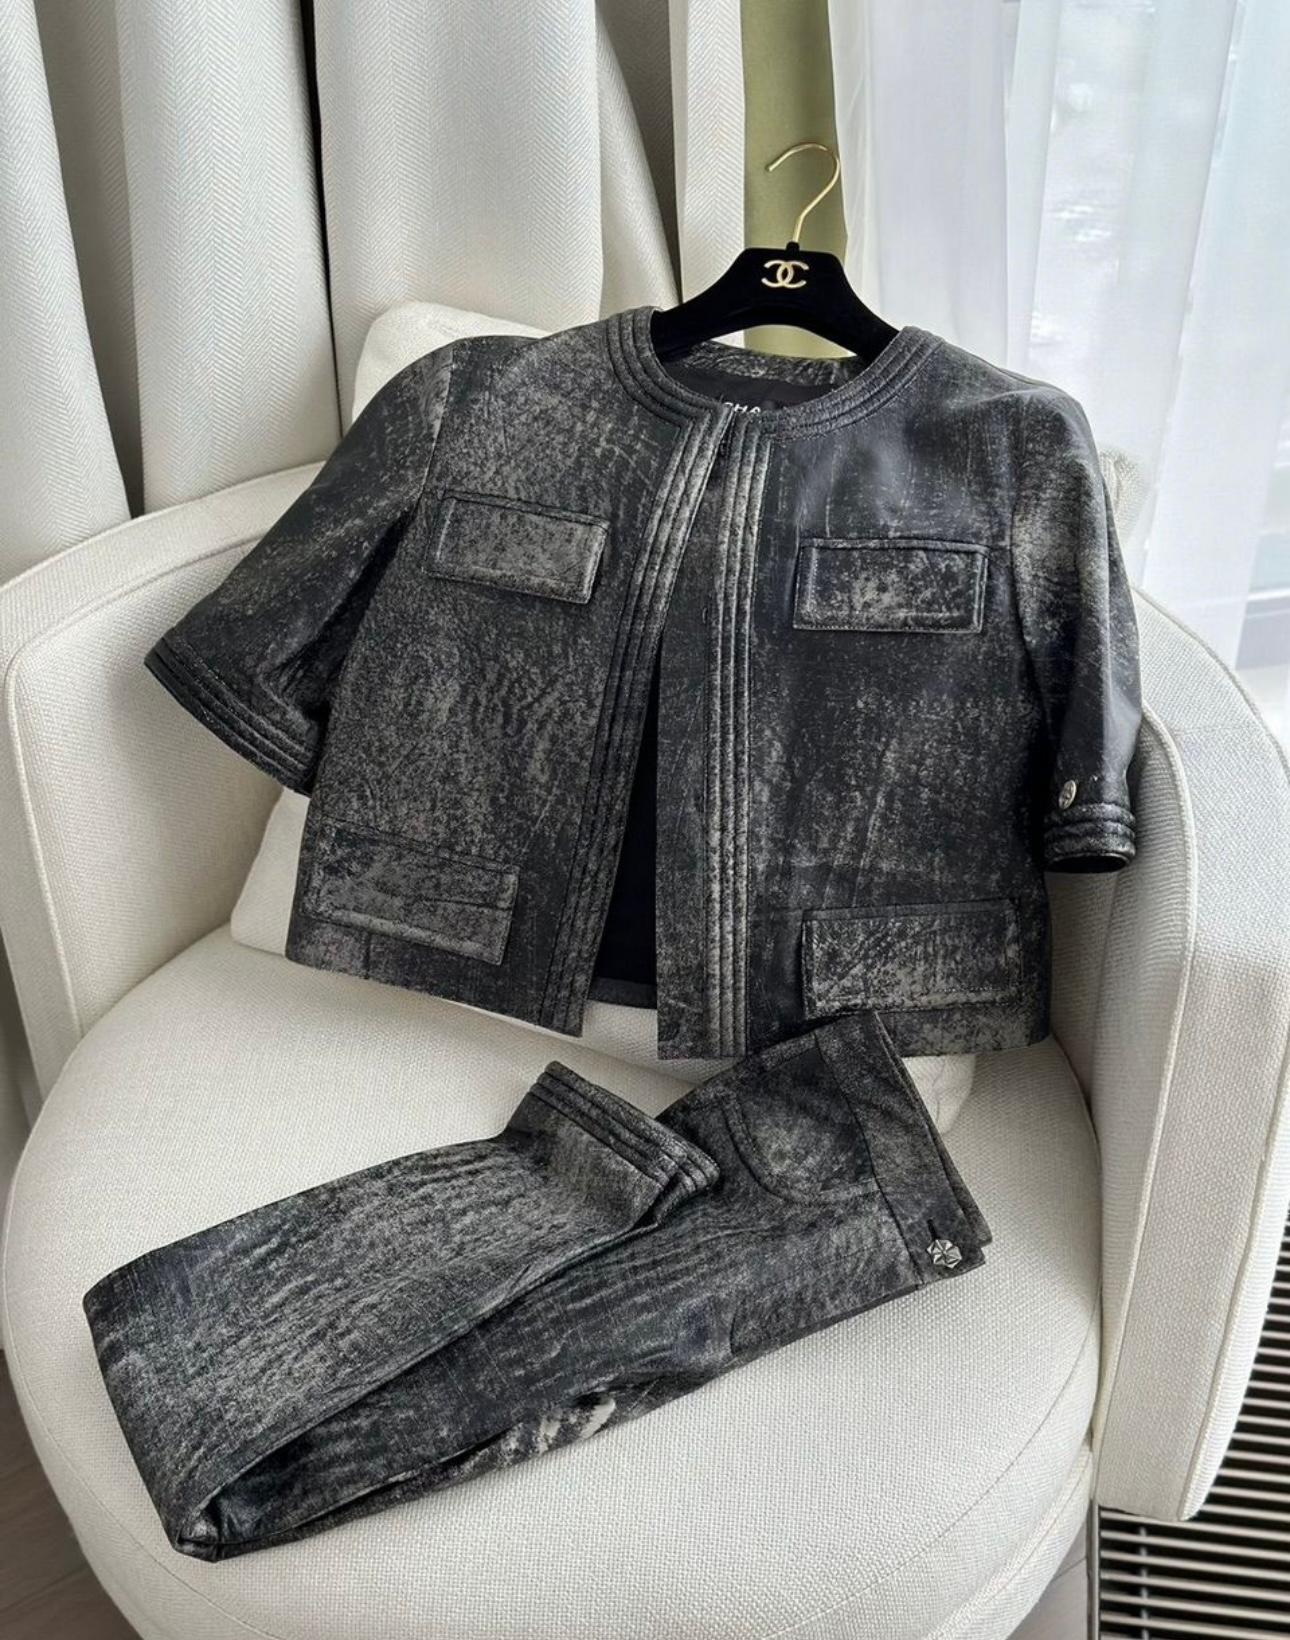 Chanel 12K$ Runway Grey Leather Jacket and Trousers Ensemble In Excellent Condition For Sale In Dubai, AE